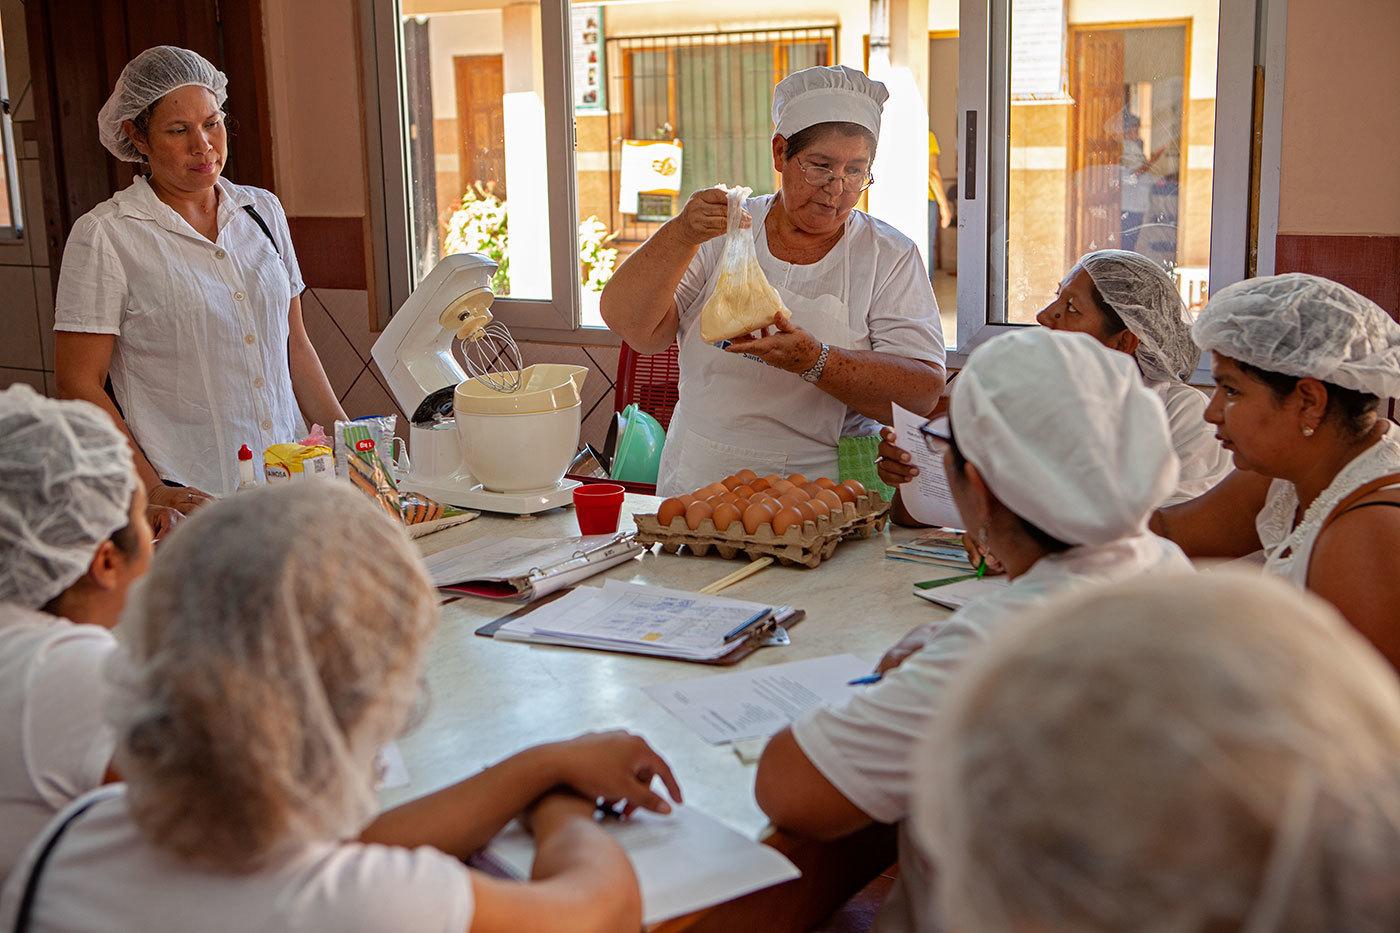 Women wearing white and hair nets gather around a table and watch a cooking instructor